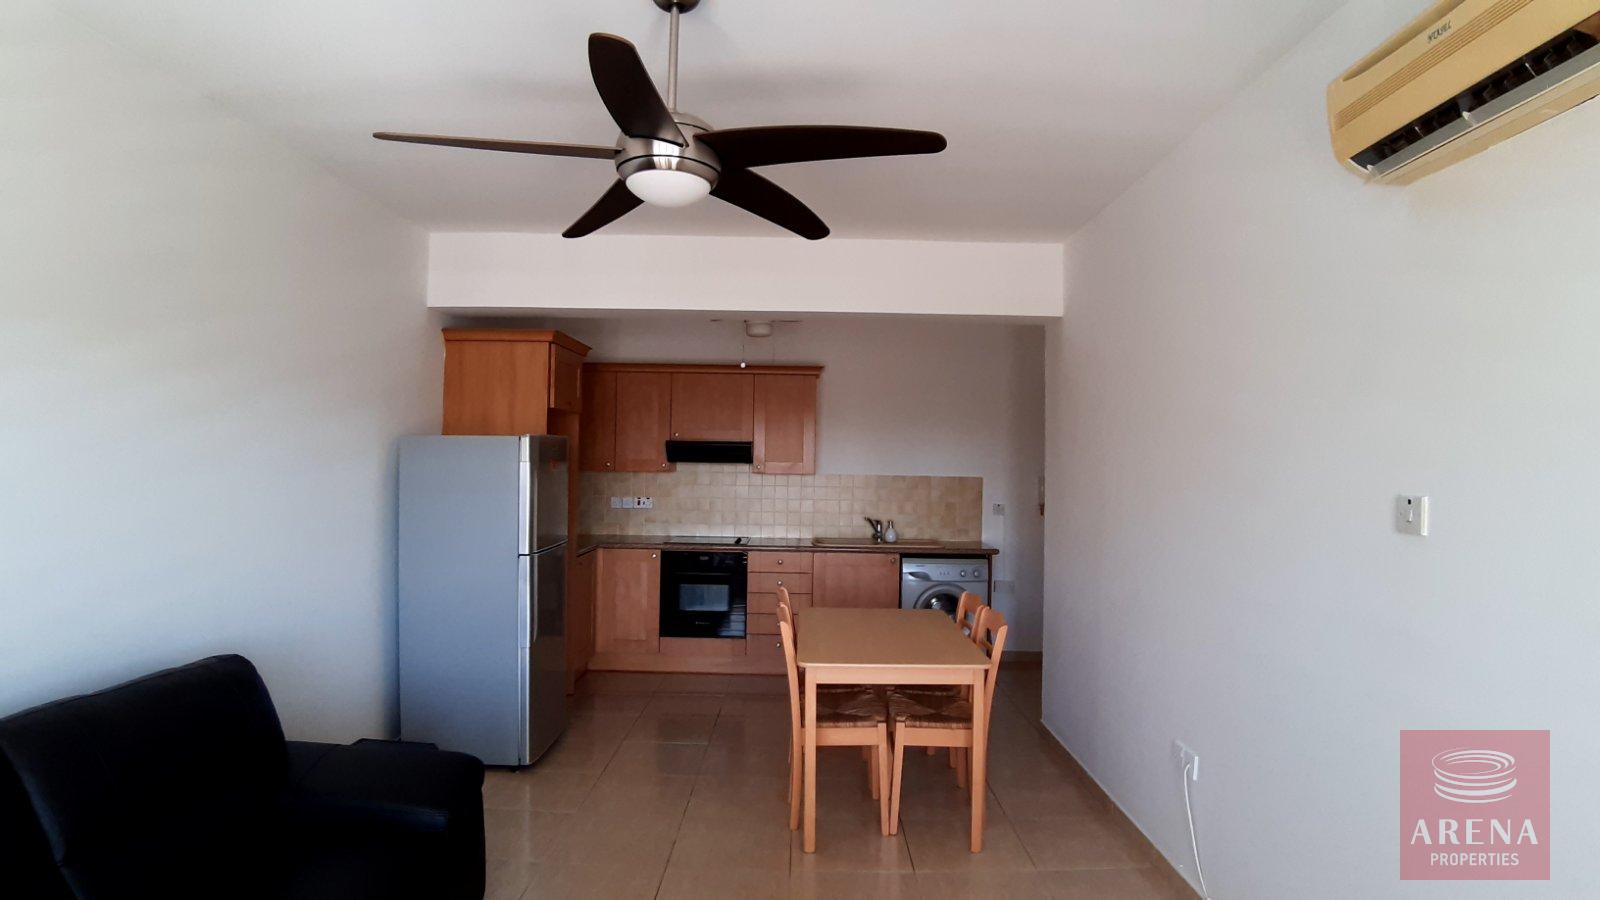 2 Bed Apt for rent in Paralimni - dining area